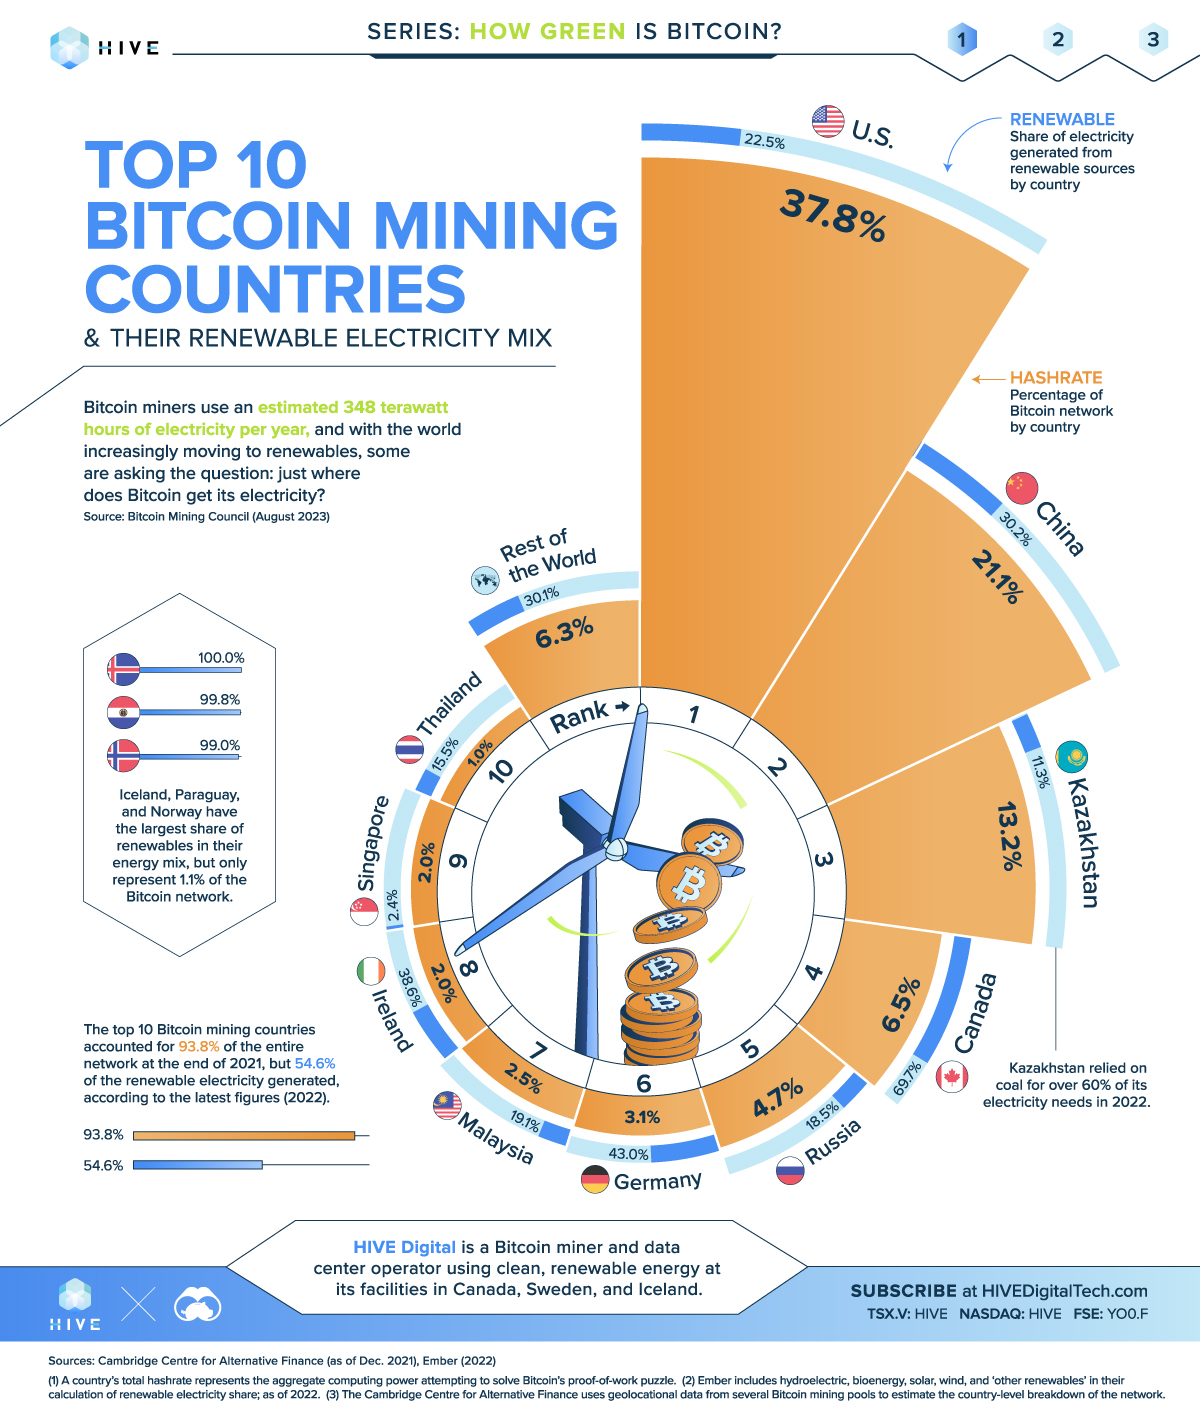 Top 10 Cryptocurrency Coins to Mine in the Year 